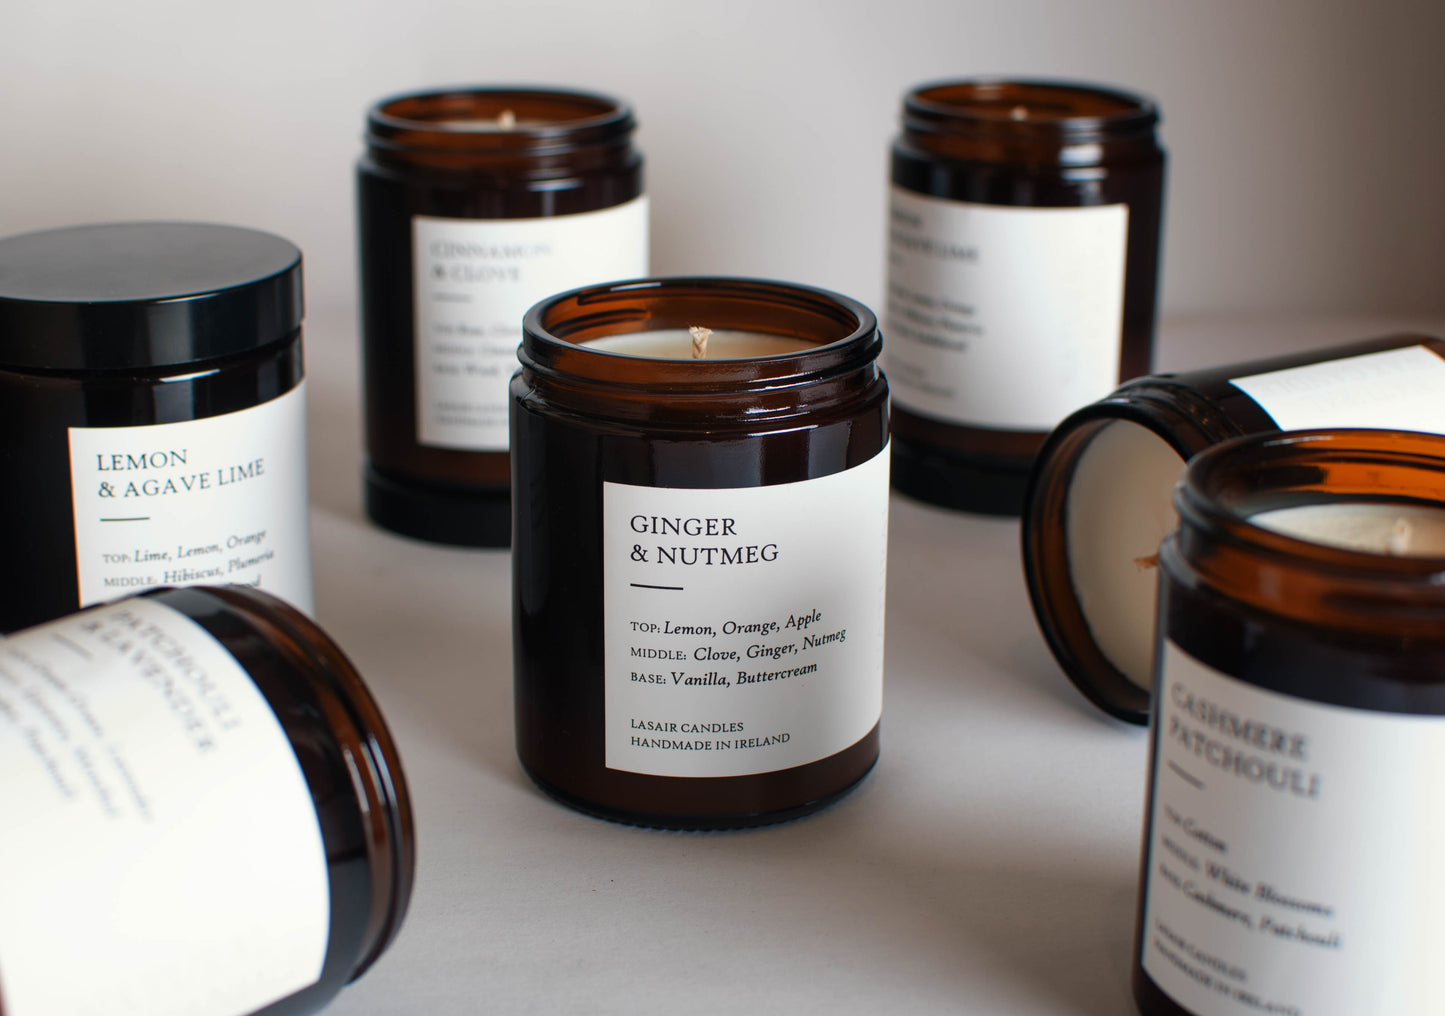 Limited Edition Scented Apothecary Candles